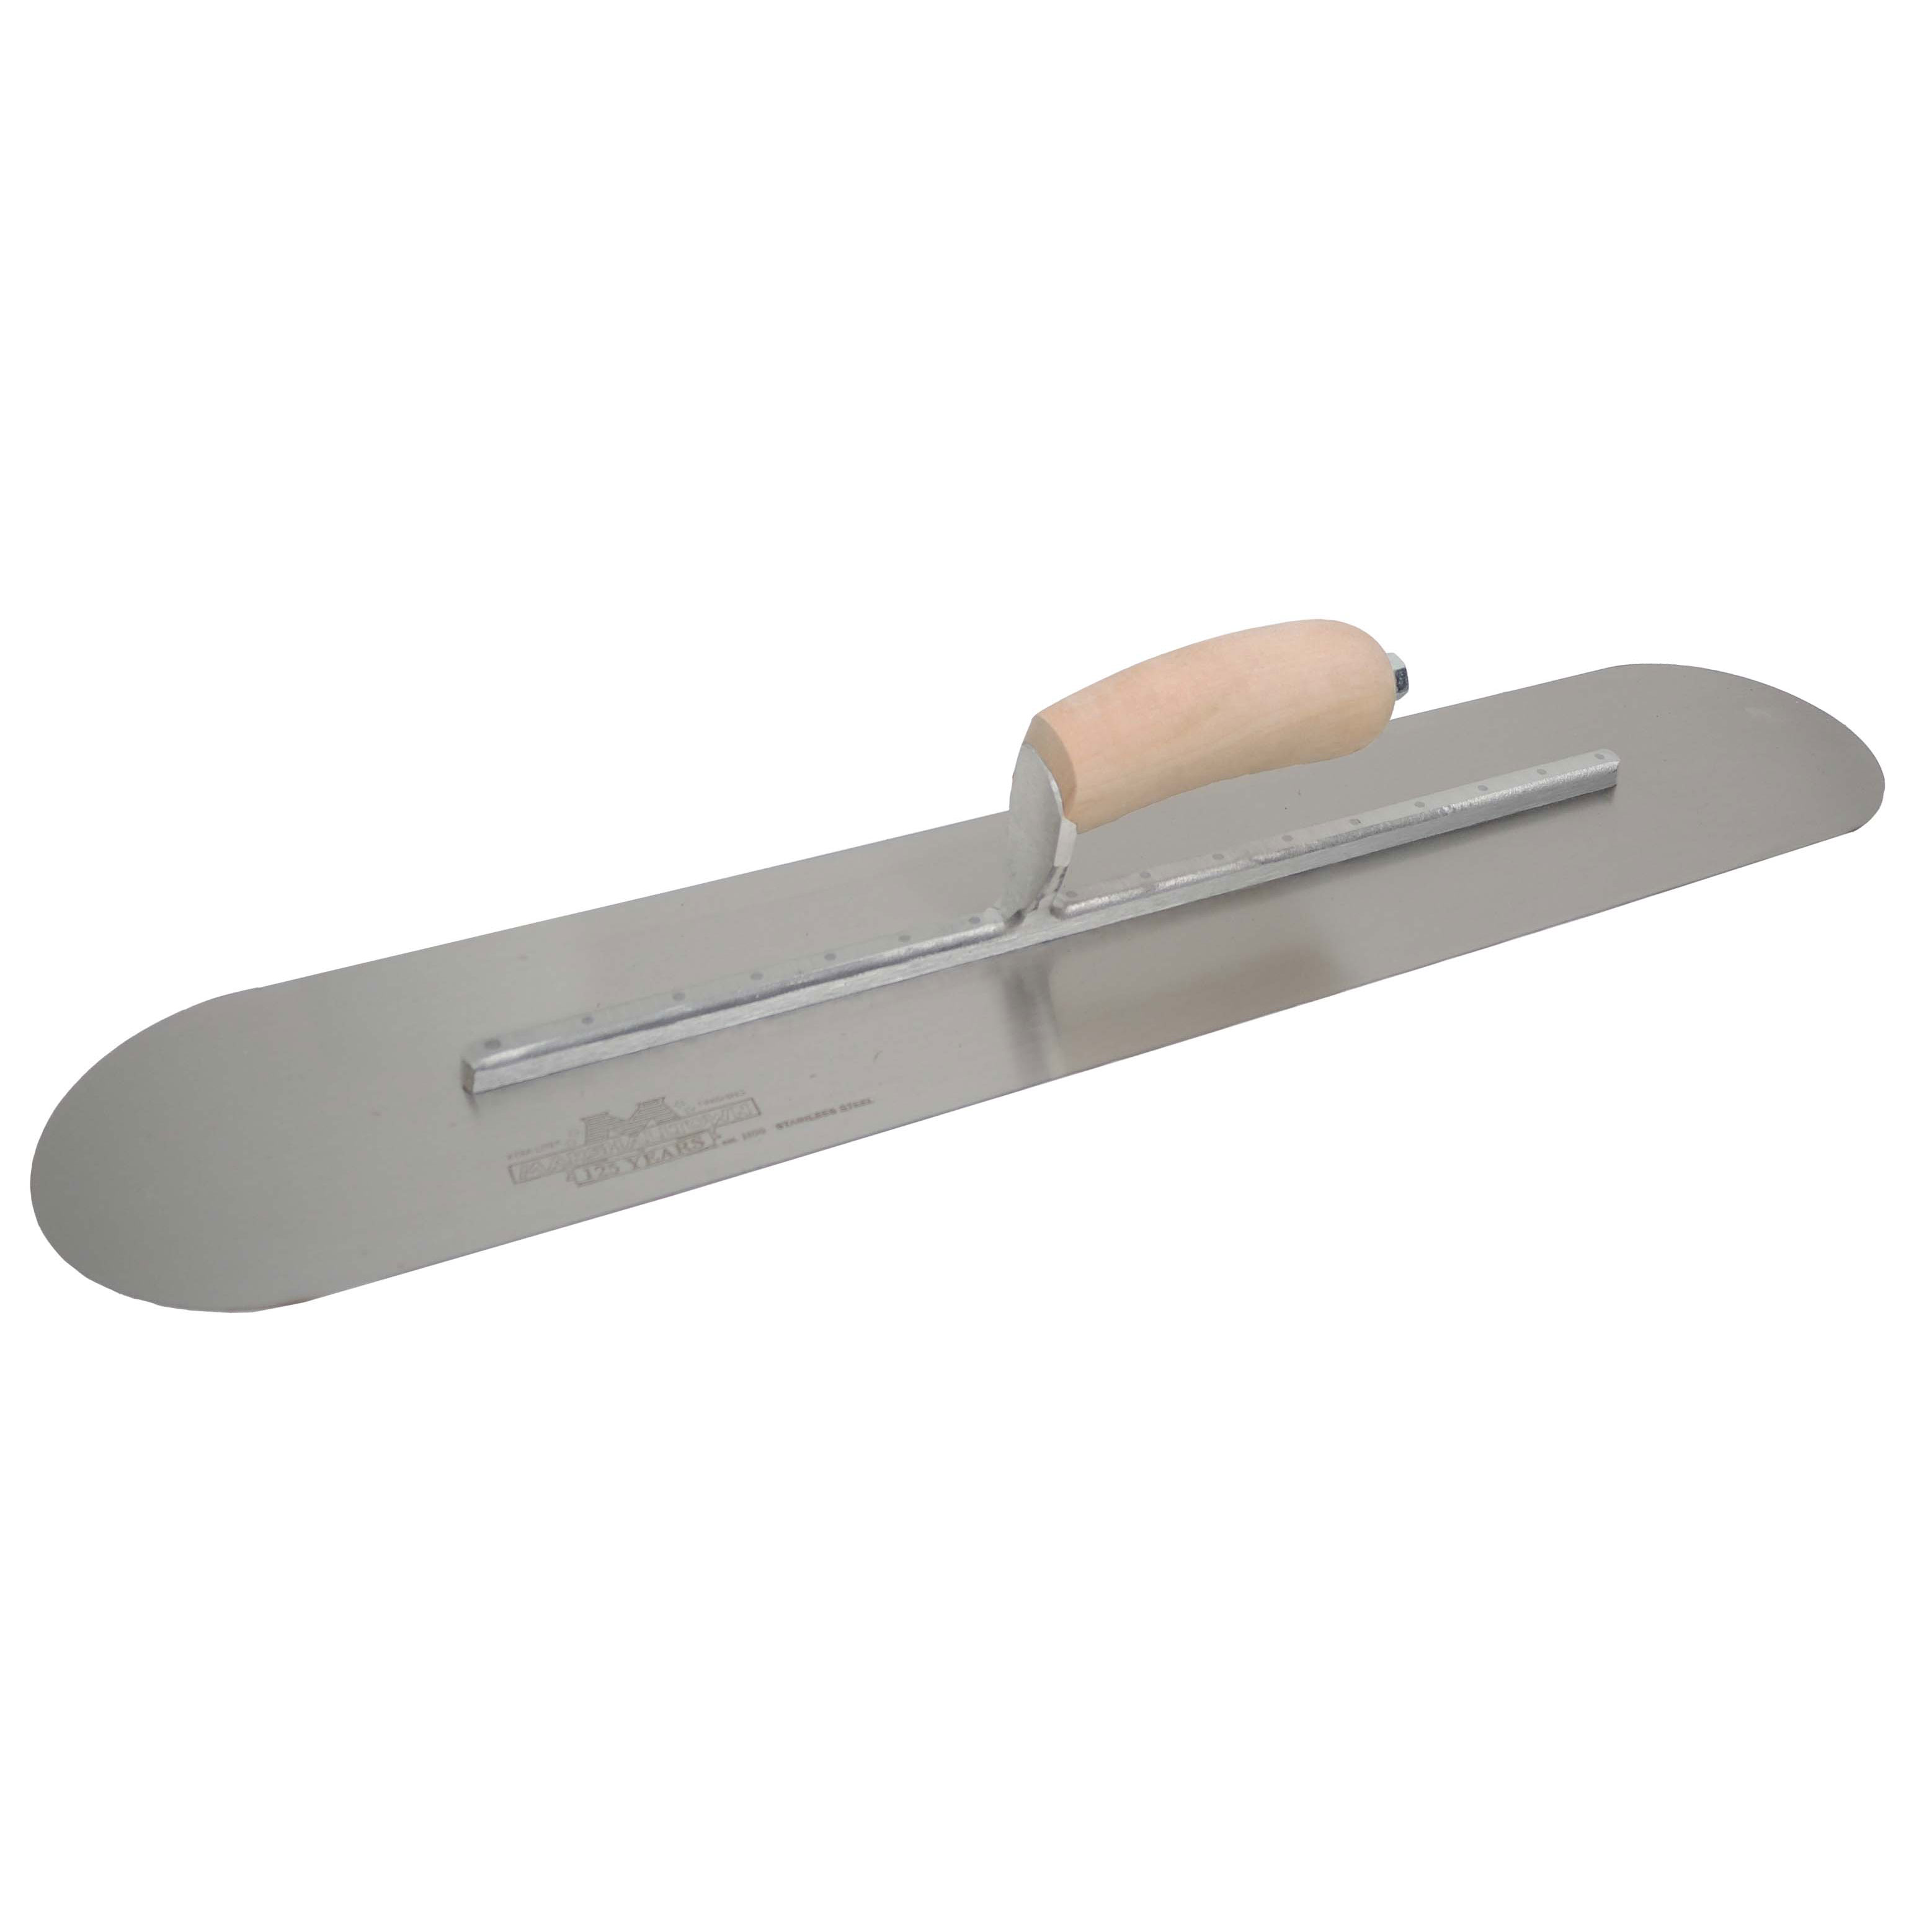 Marshalltown SP245SSR16 24in x 5in Pool Trowel with Exposed Rivet Trowels and Wood Handle SP245SSR16